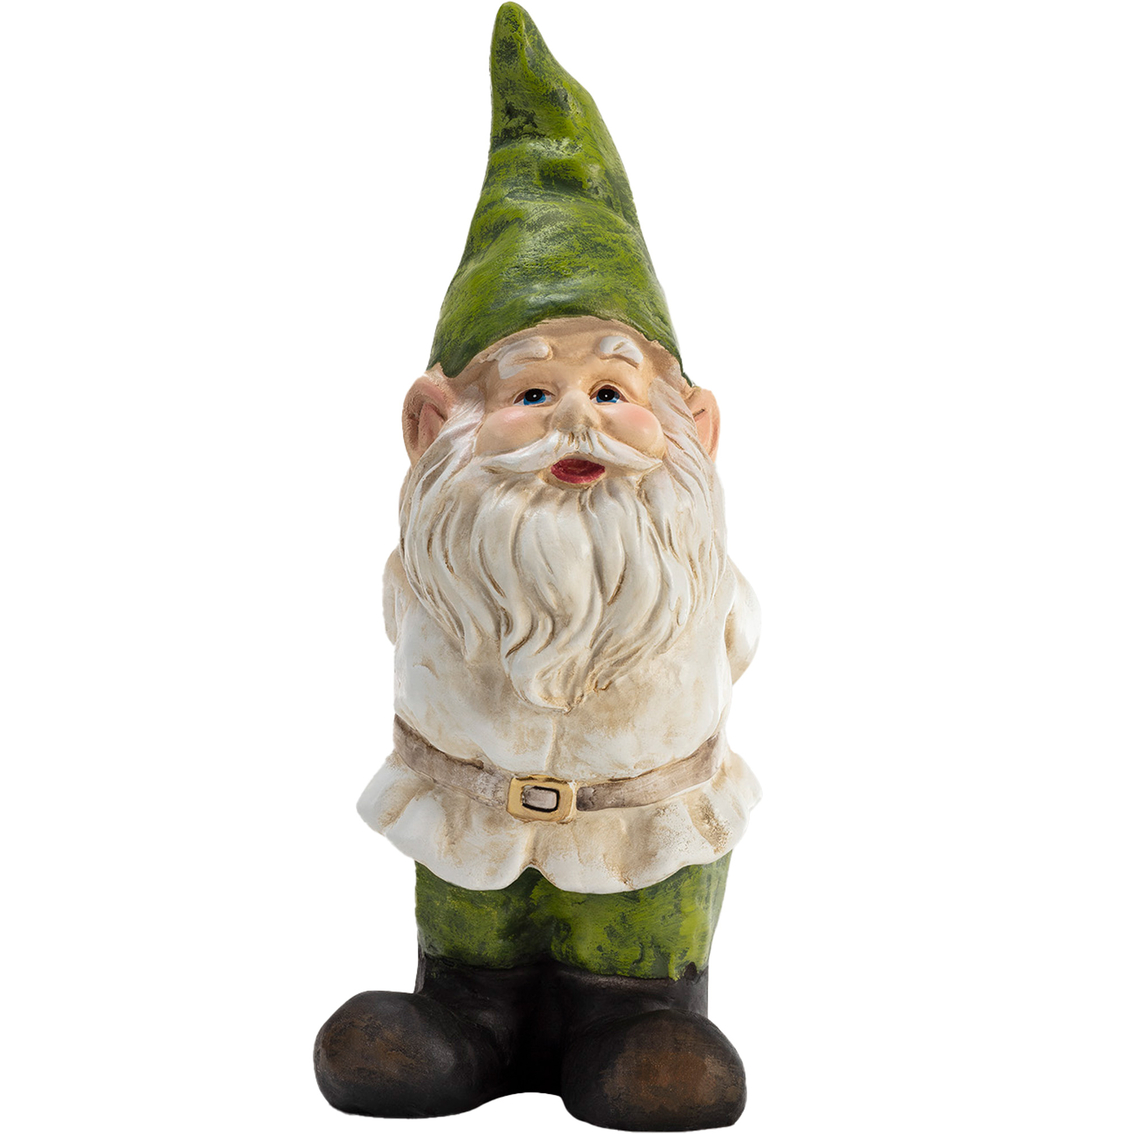 Alpine 12 In. Tall Traditional Outdoor Garden Gnome Yard Statue ...